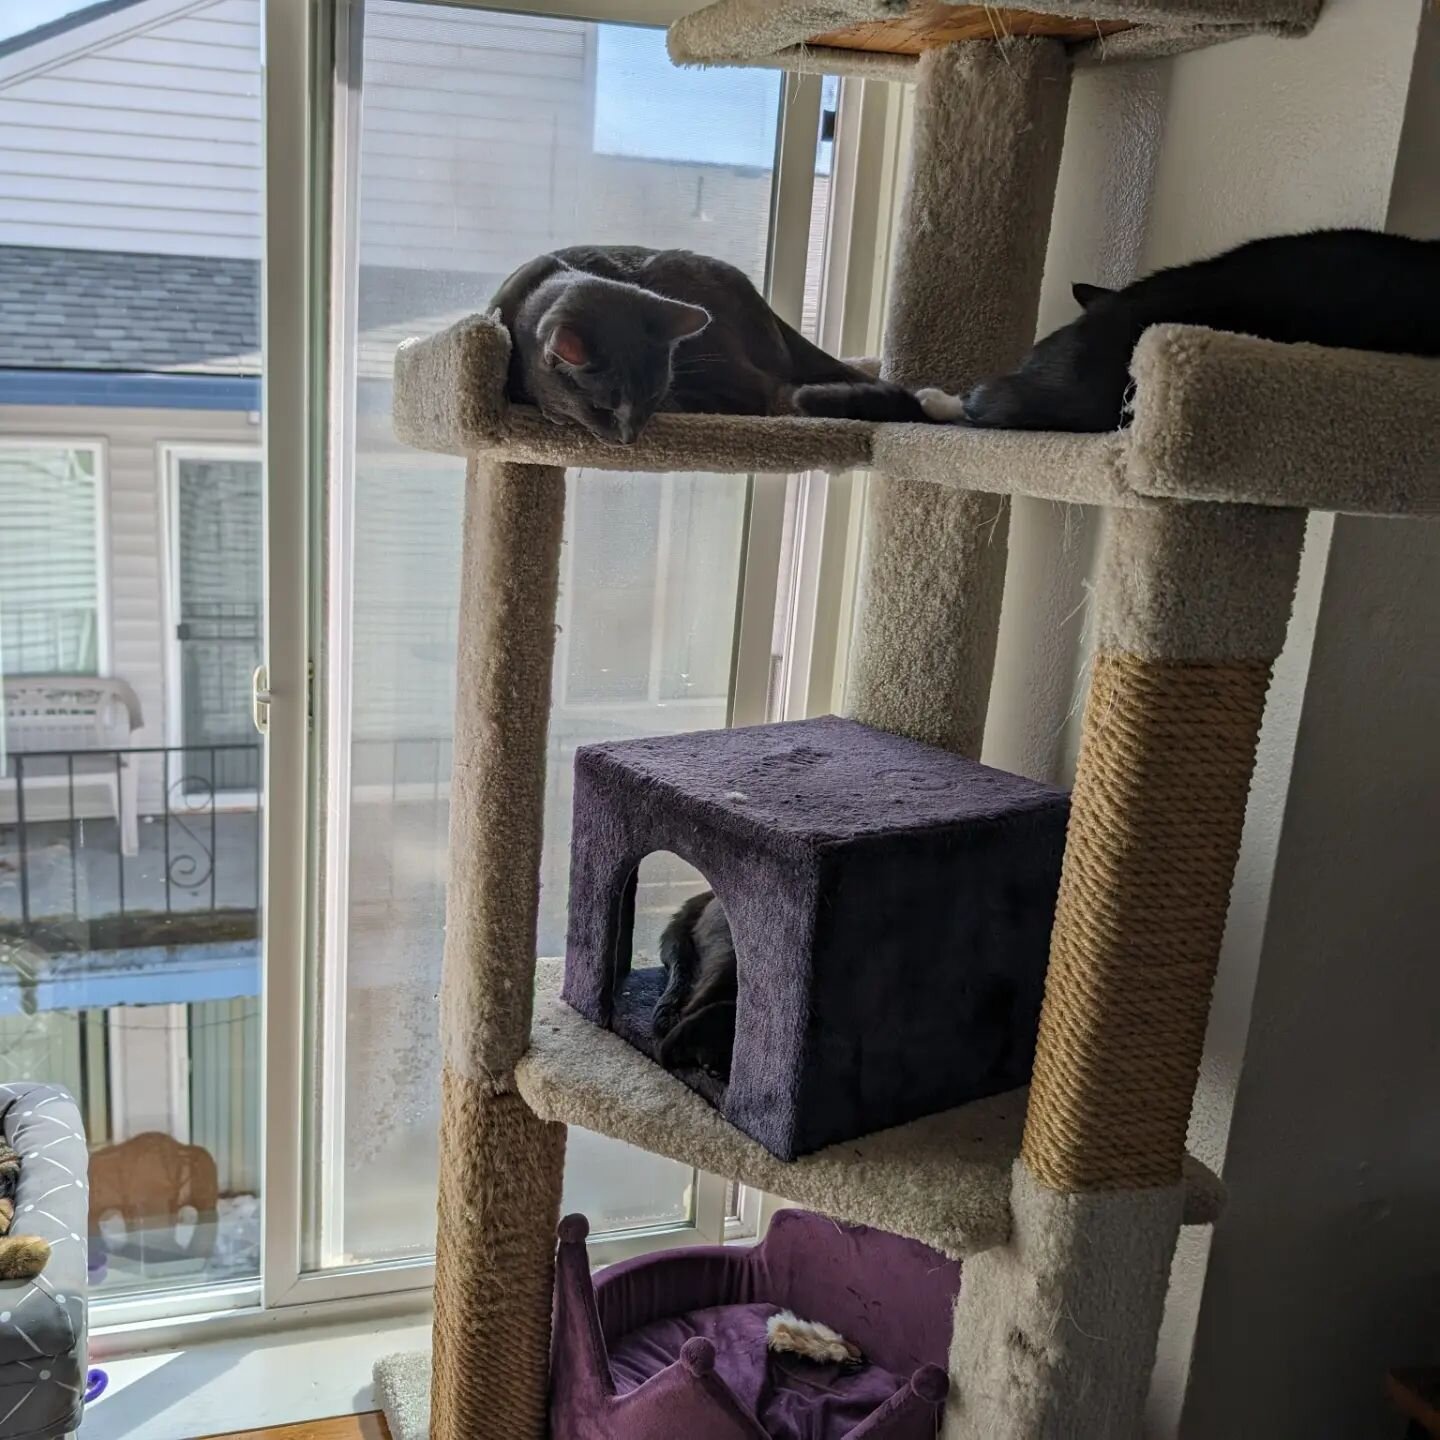 Big break with the fur babies yesterday. @iamthedivanamed_star @luci_tothe_max @mamamorganadrama and @silvernado_xan all got on the cat tree and in the cat corner together! 

It's so great, but it's just one good day, let's keep working on making mor